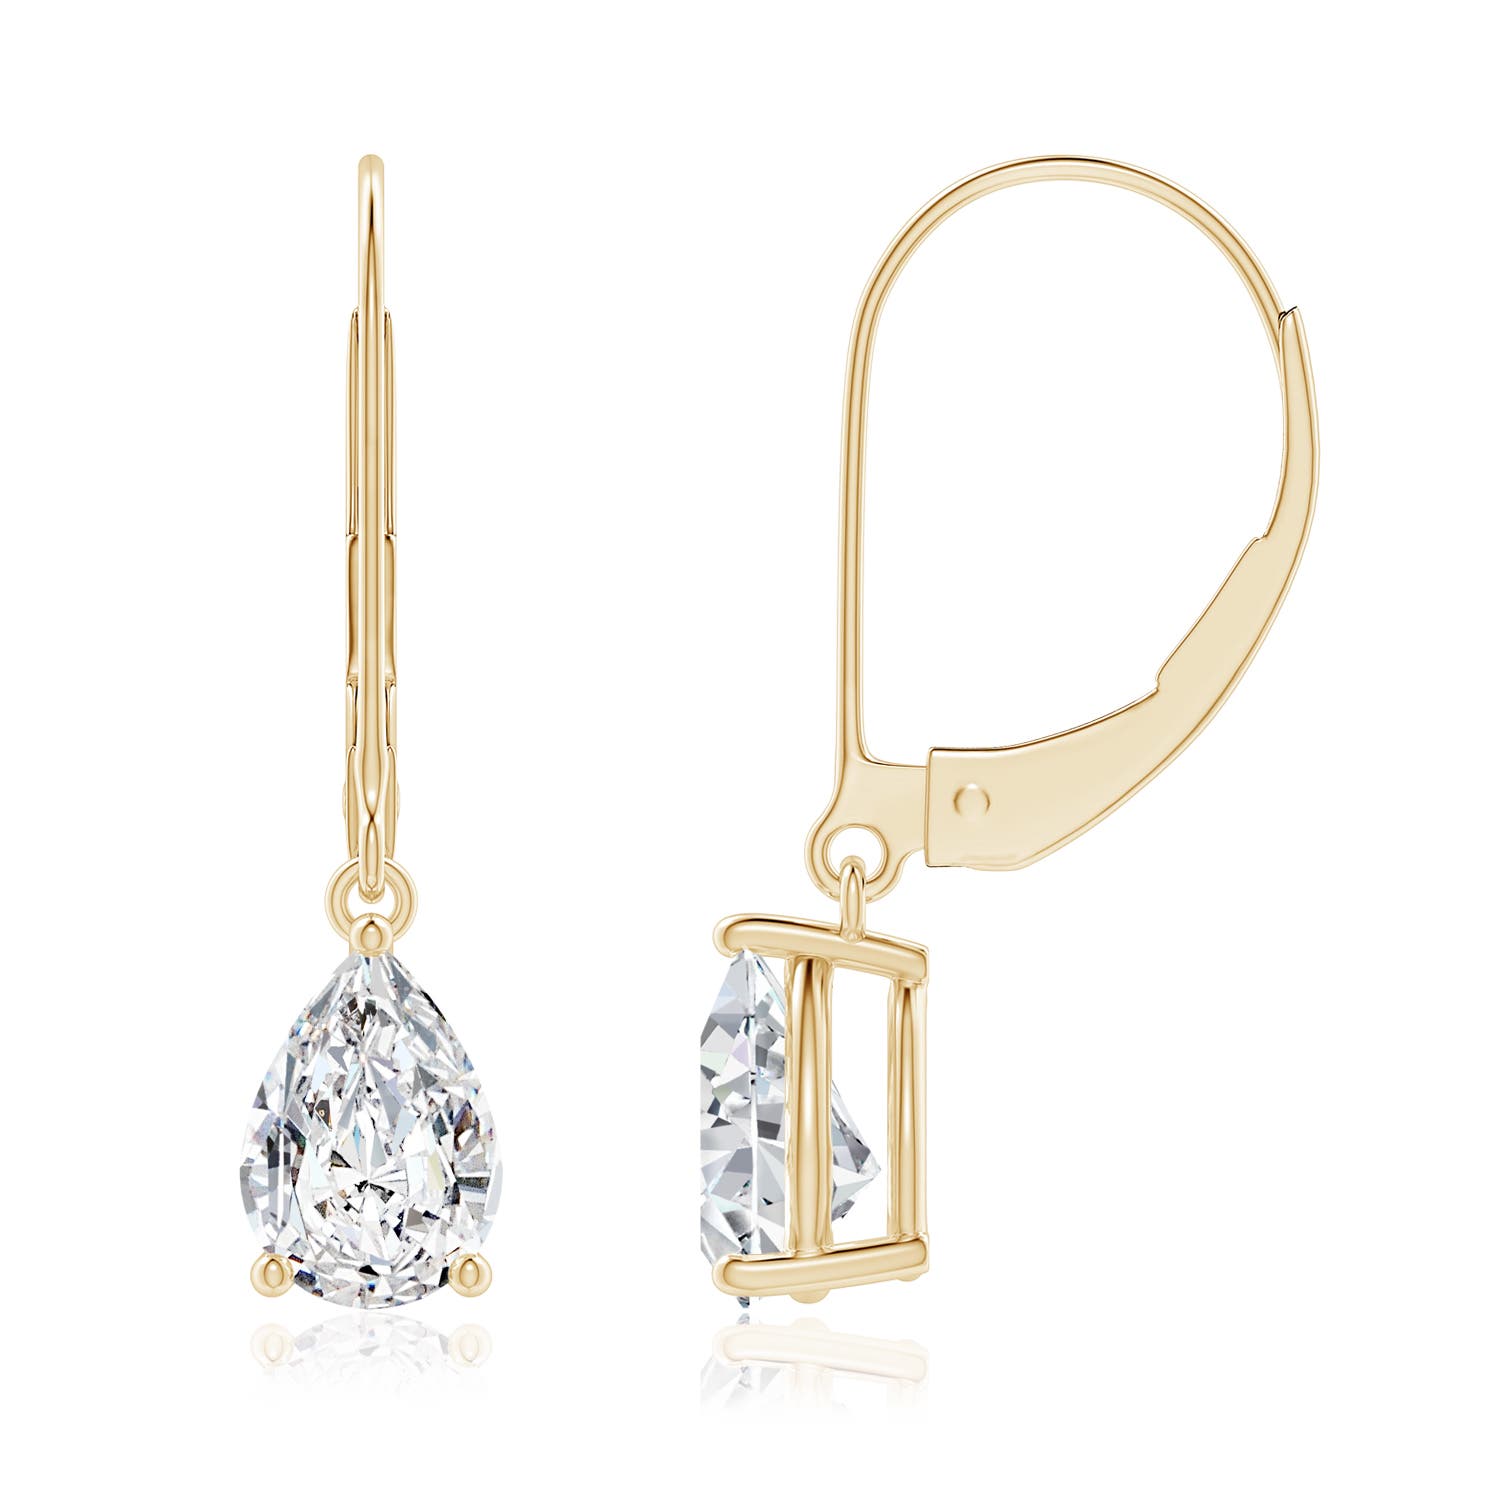 H, SI2 / 1.42 CT / 14 KT Yellow Gold